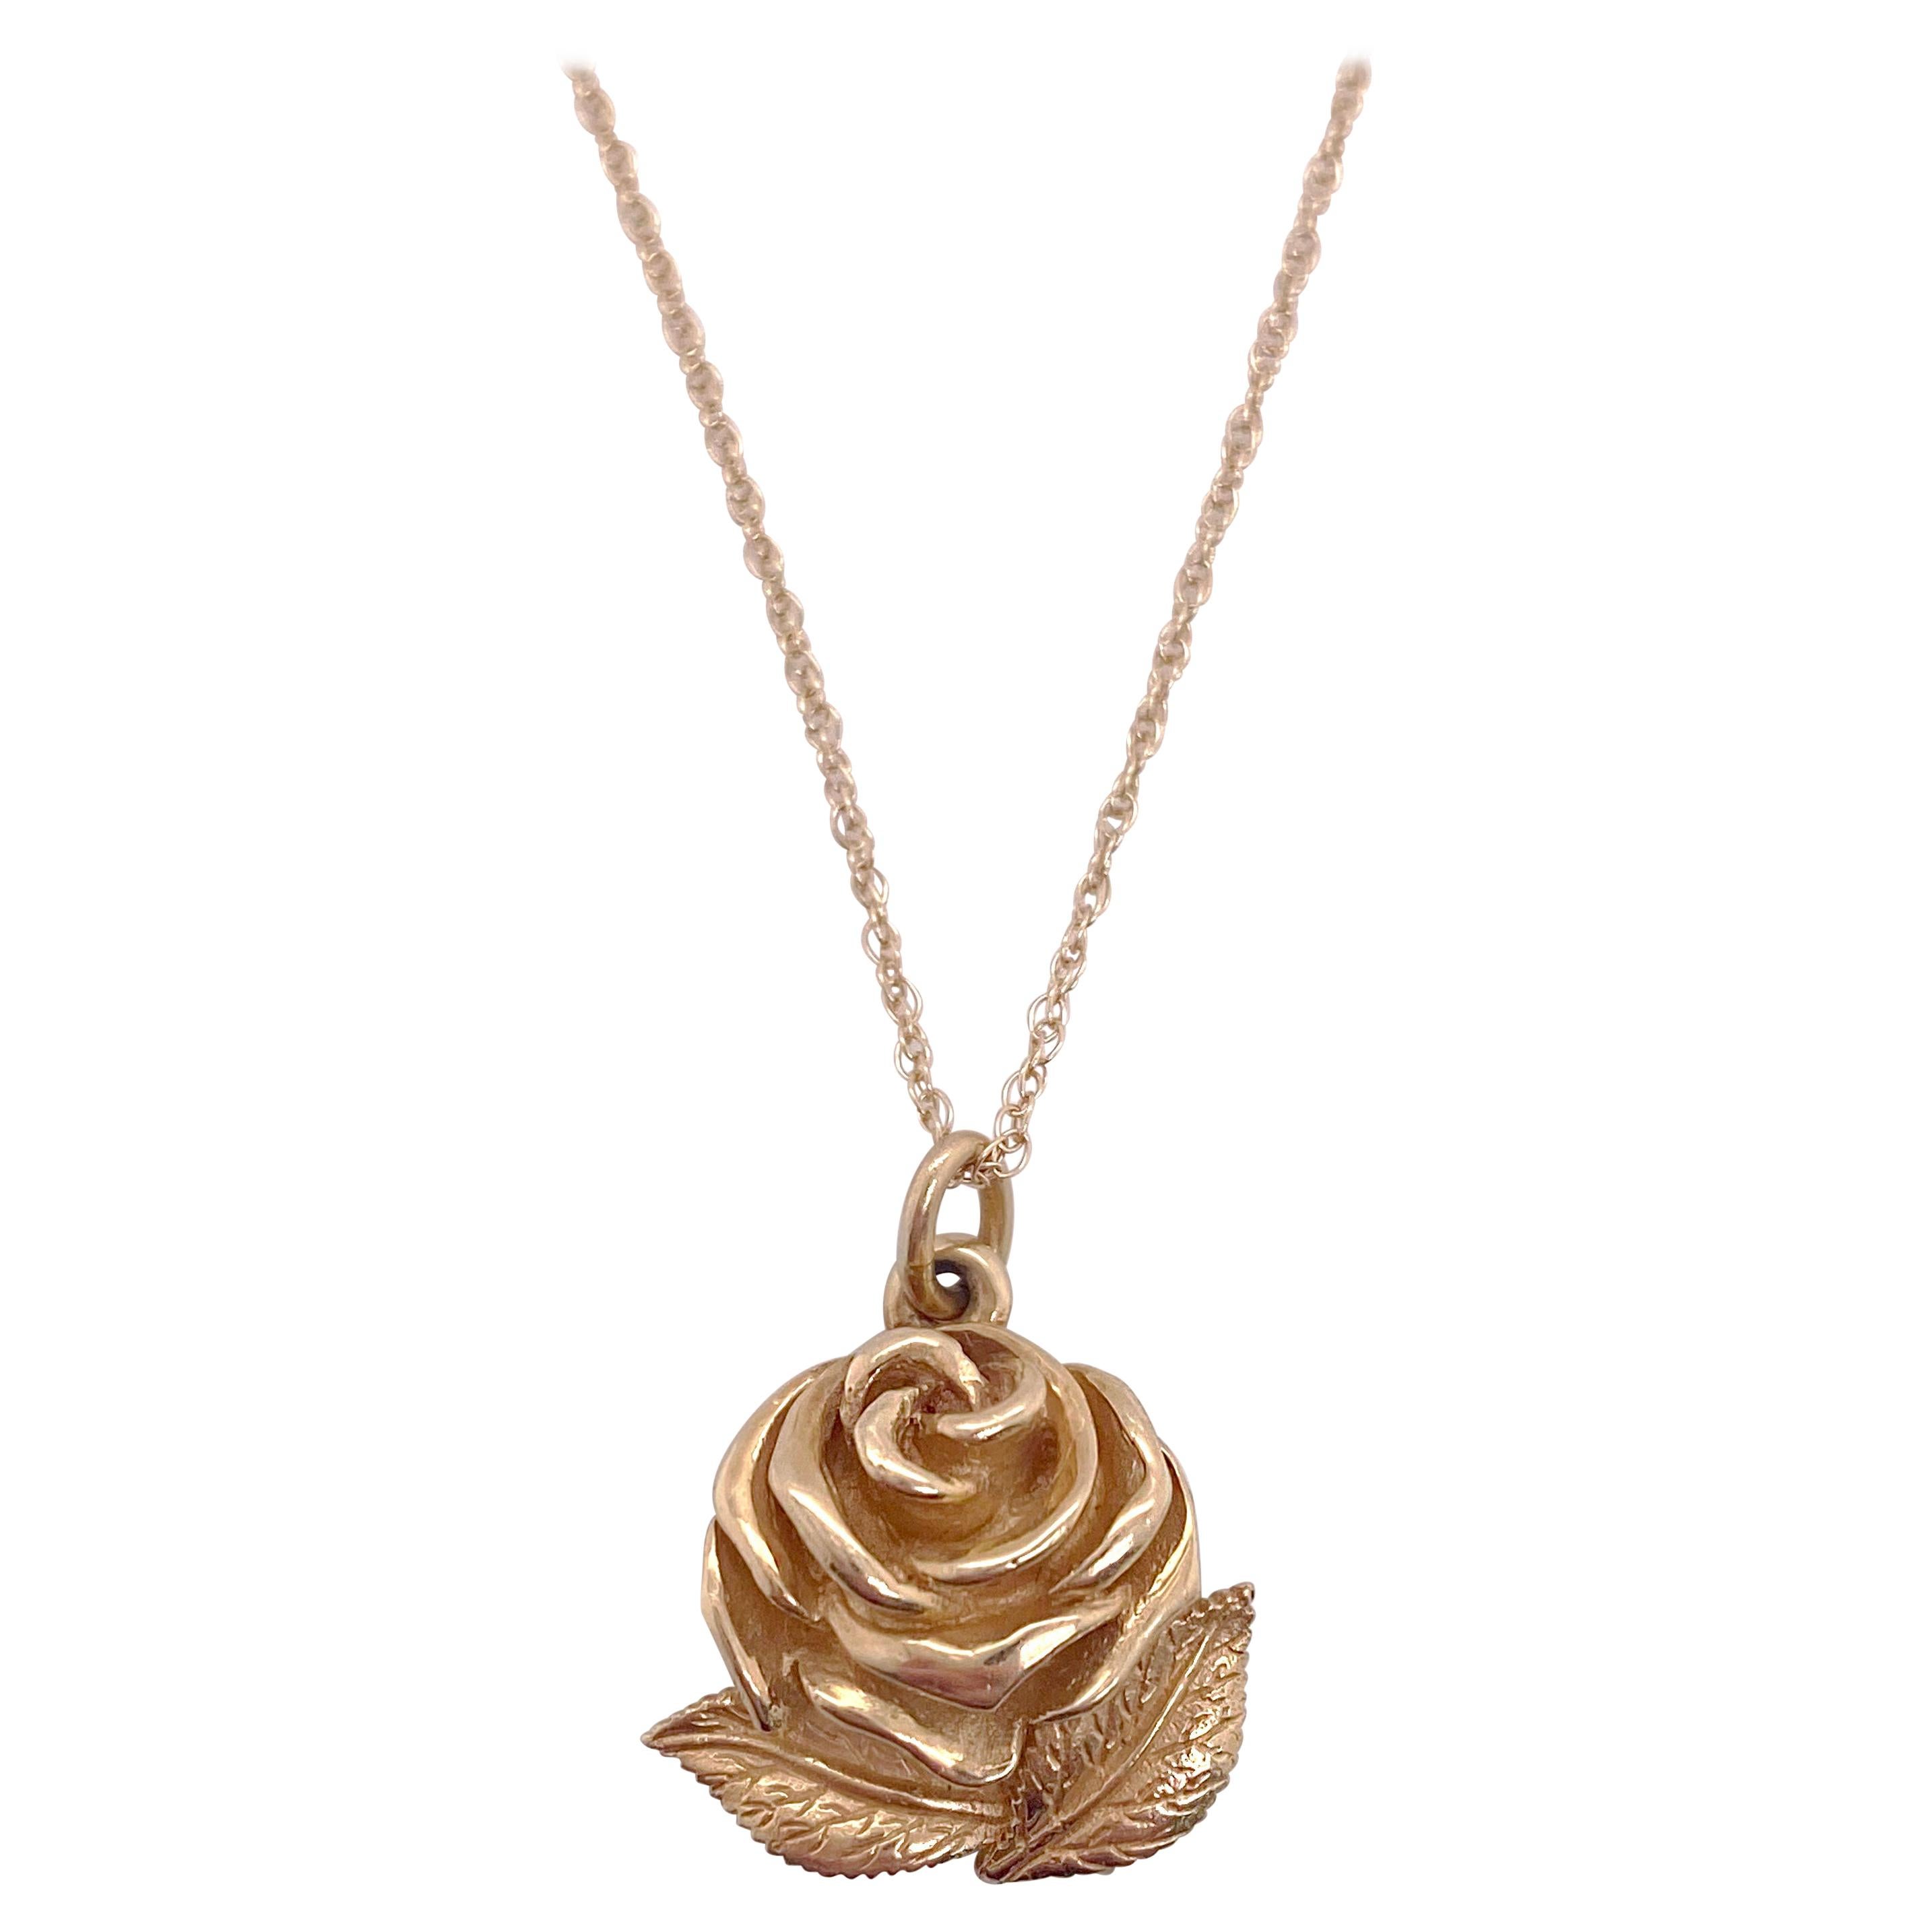 Retired James Avery Rose Pendant Necklace, James Avery Yellow Gold, Drop Pendant